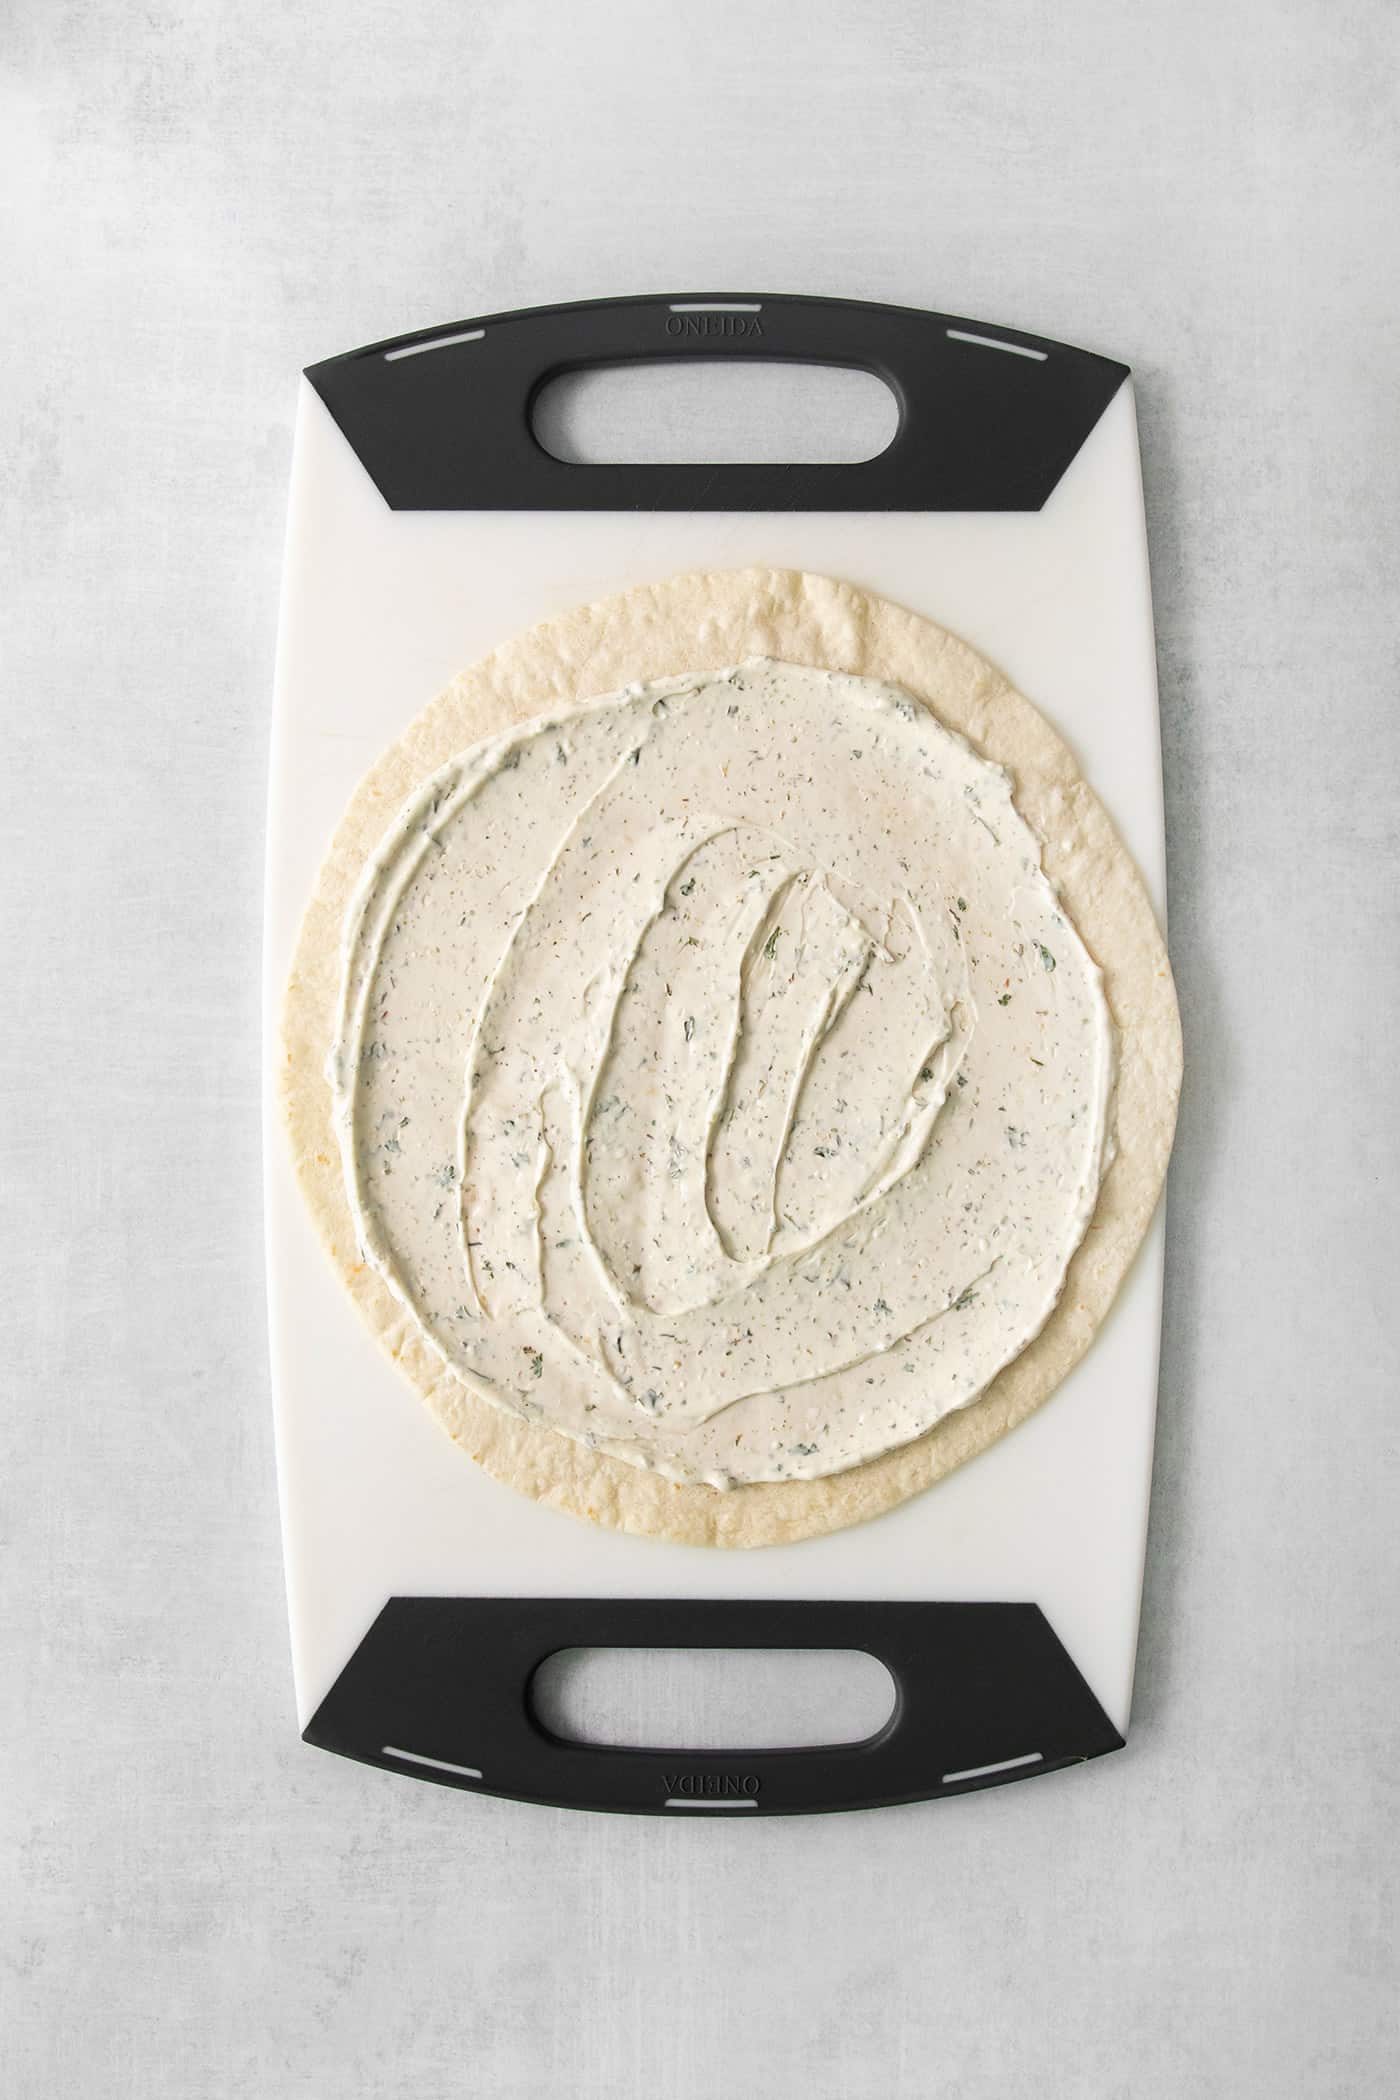 A large flour tortilla on a cutting board is topped with cream cheese spread.